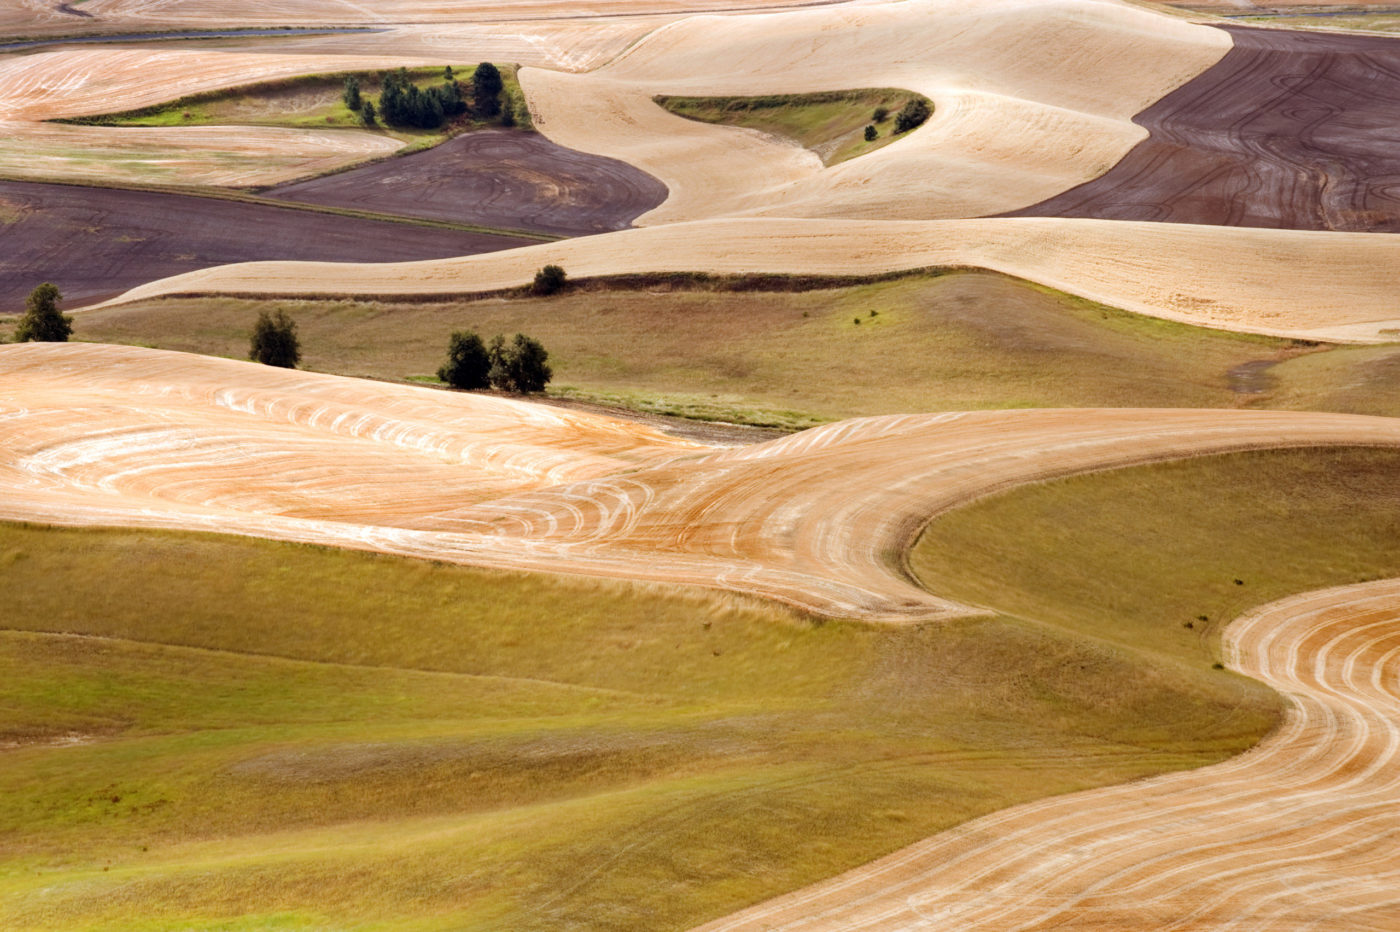 Palouse Hills crop fields at harvest time, Washington state